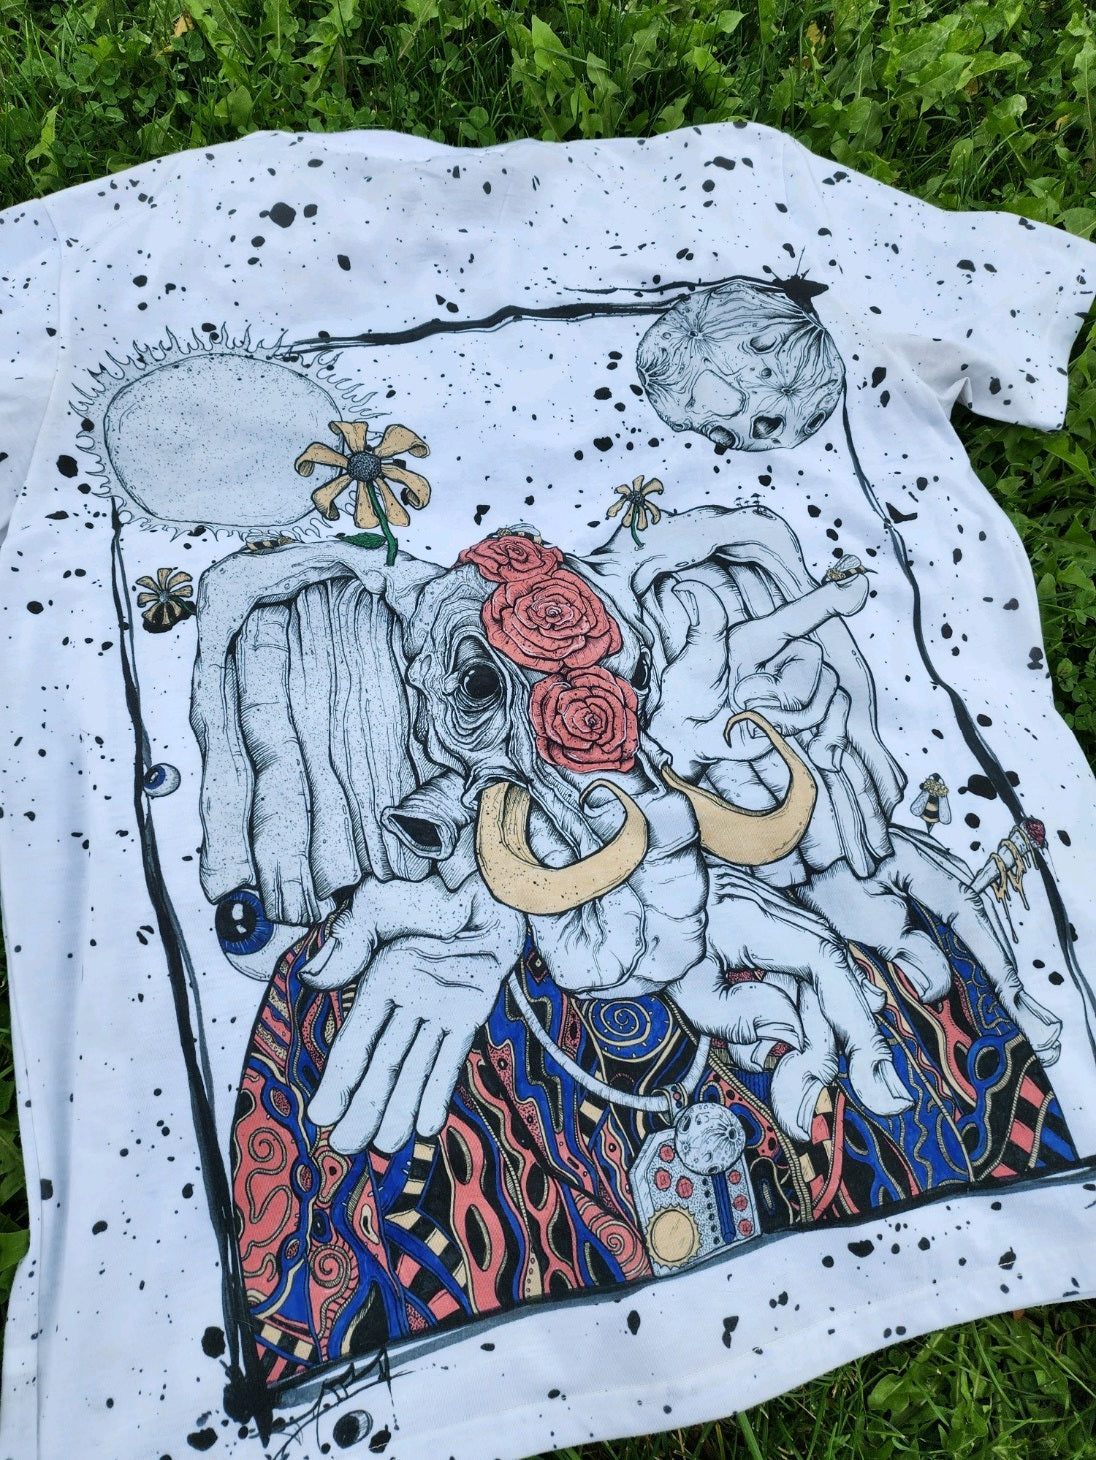 Thicc Drip Tee by Aaron Brooks